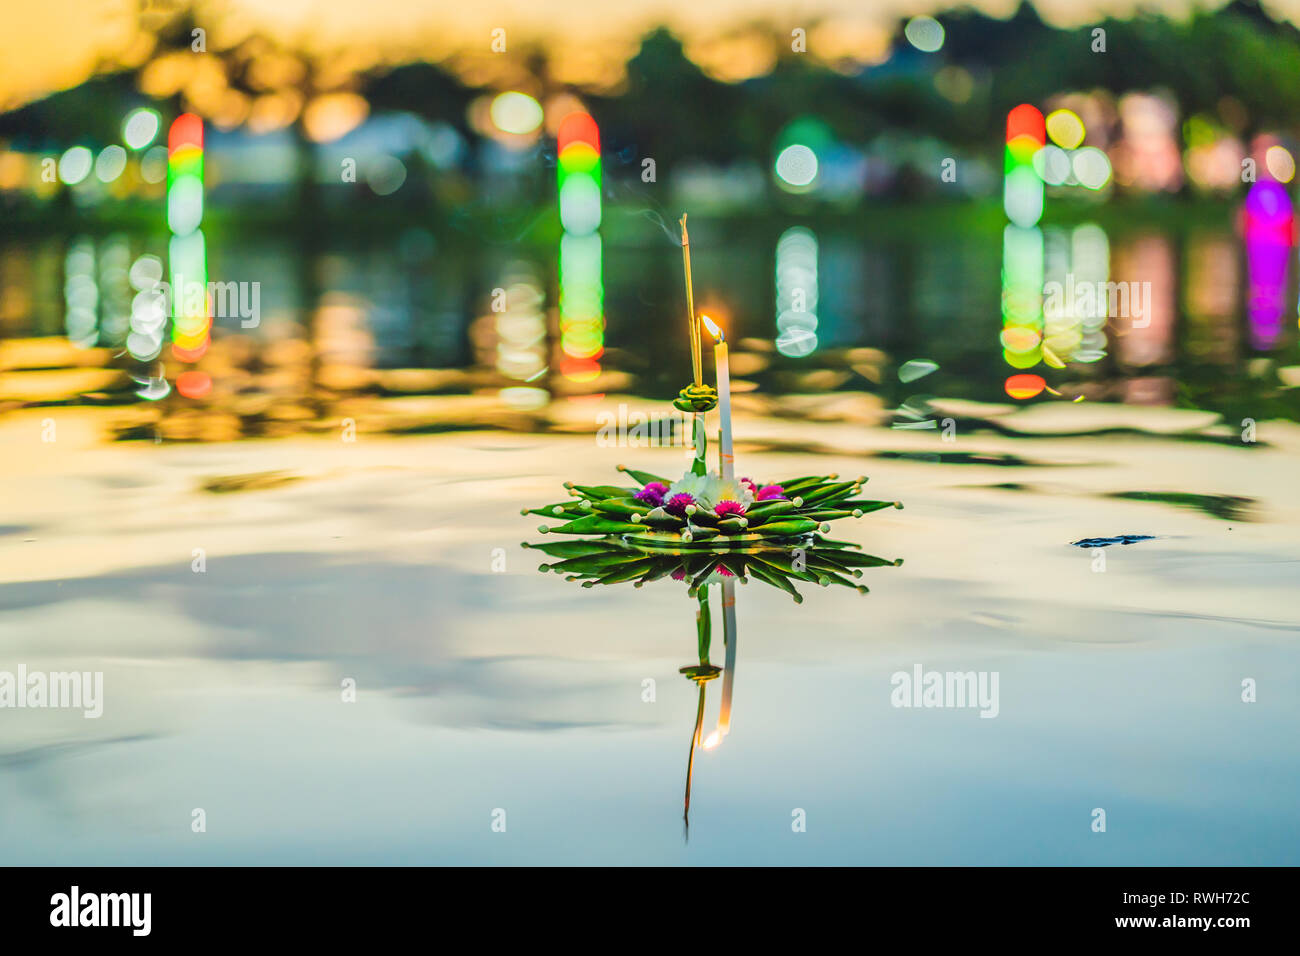 Loy Krathong festival, People buy flowers and candle to light and float on water to celebrate the Loy Krathong festival in Thailand Stock Photo